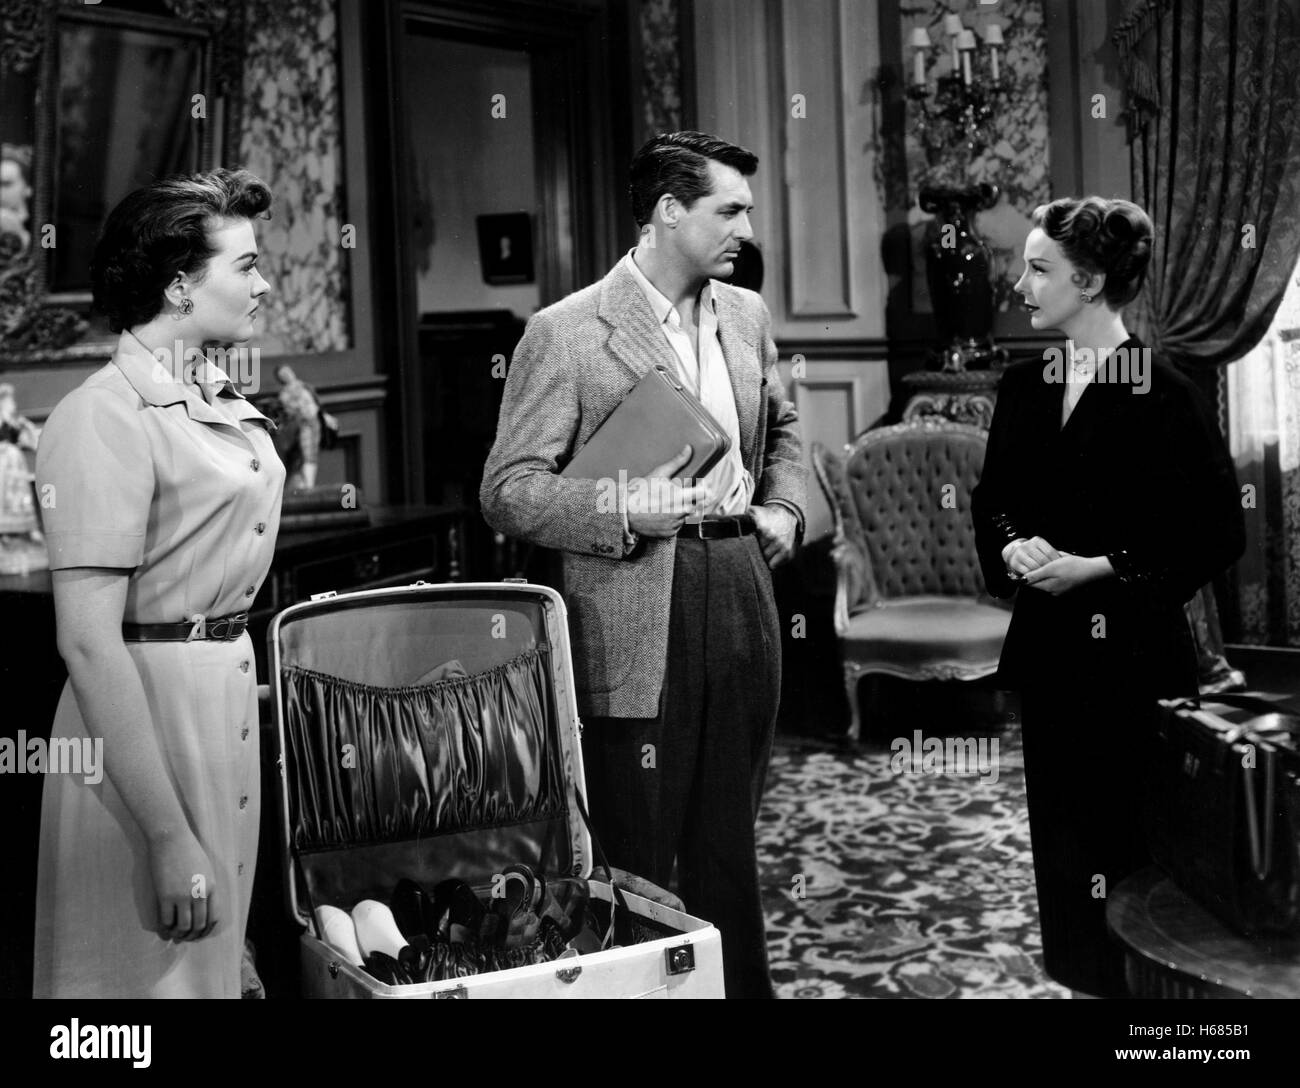 PAULA RAYMOND, Cary Grant, SIGNE HASSO, crise, 1950 Banque D'Images